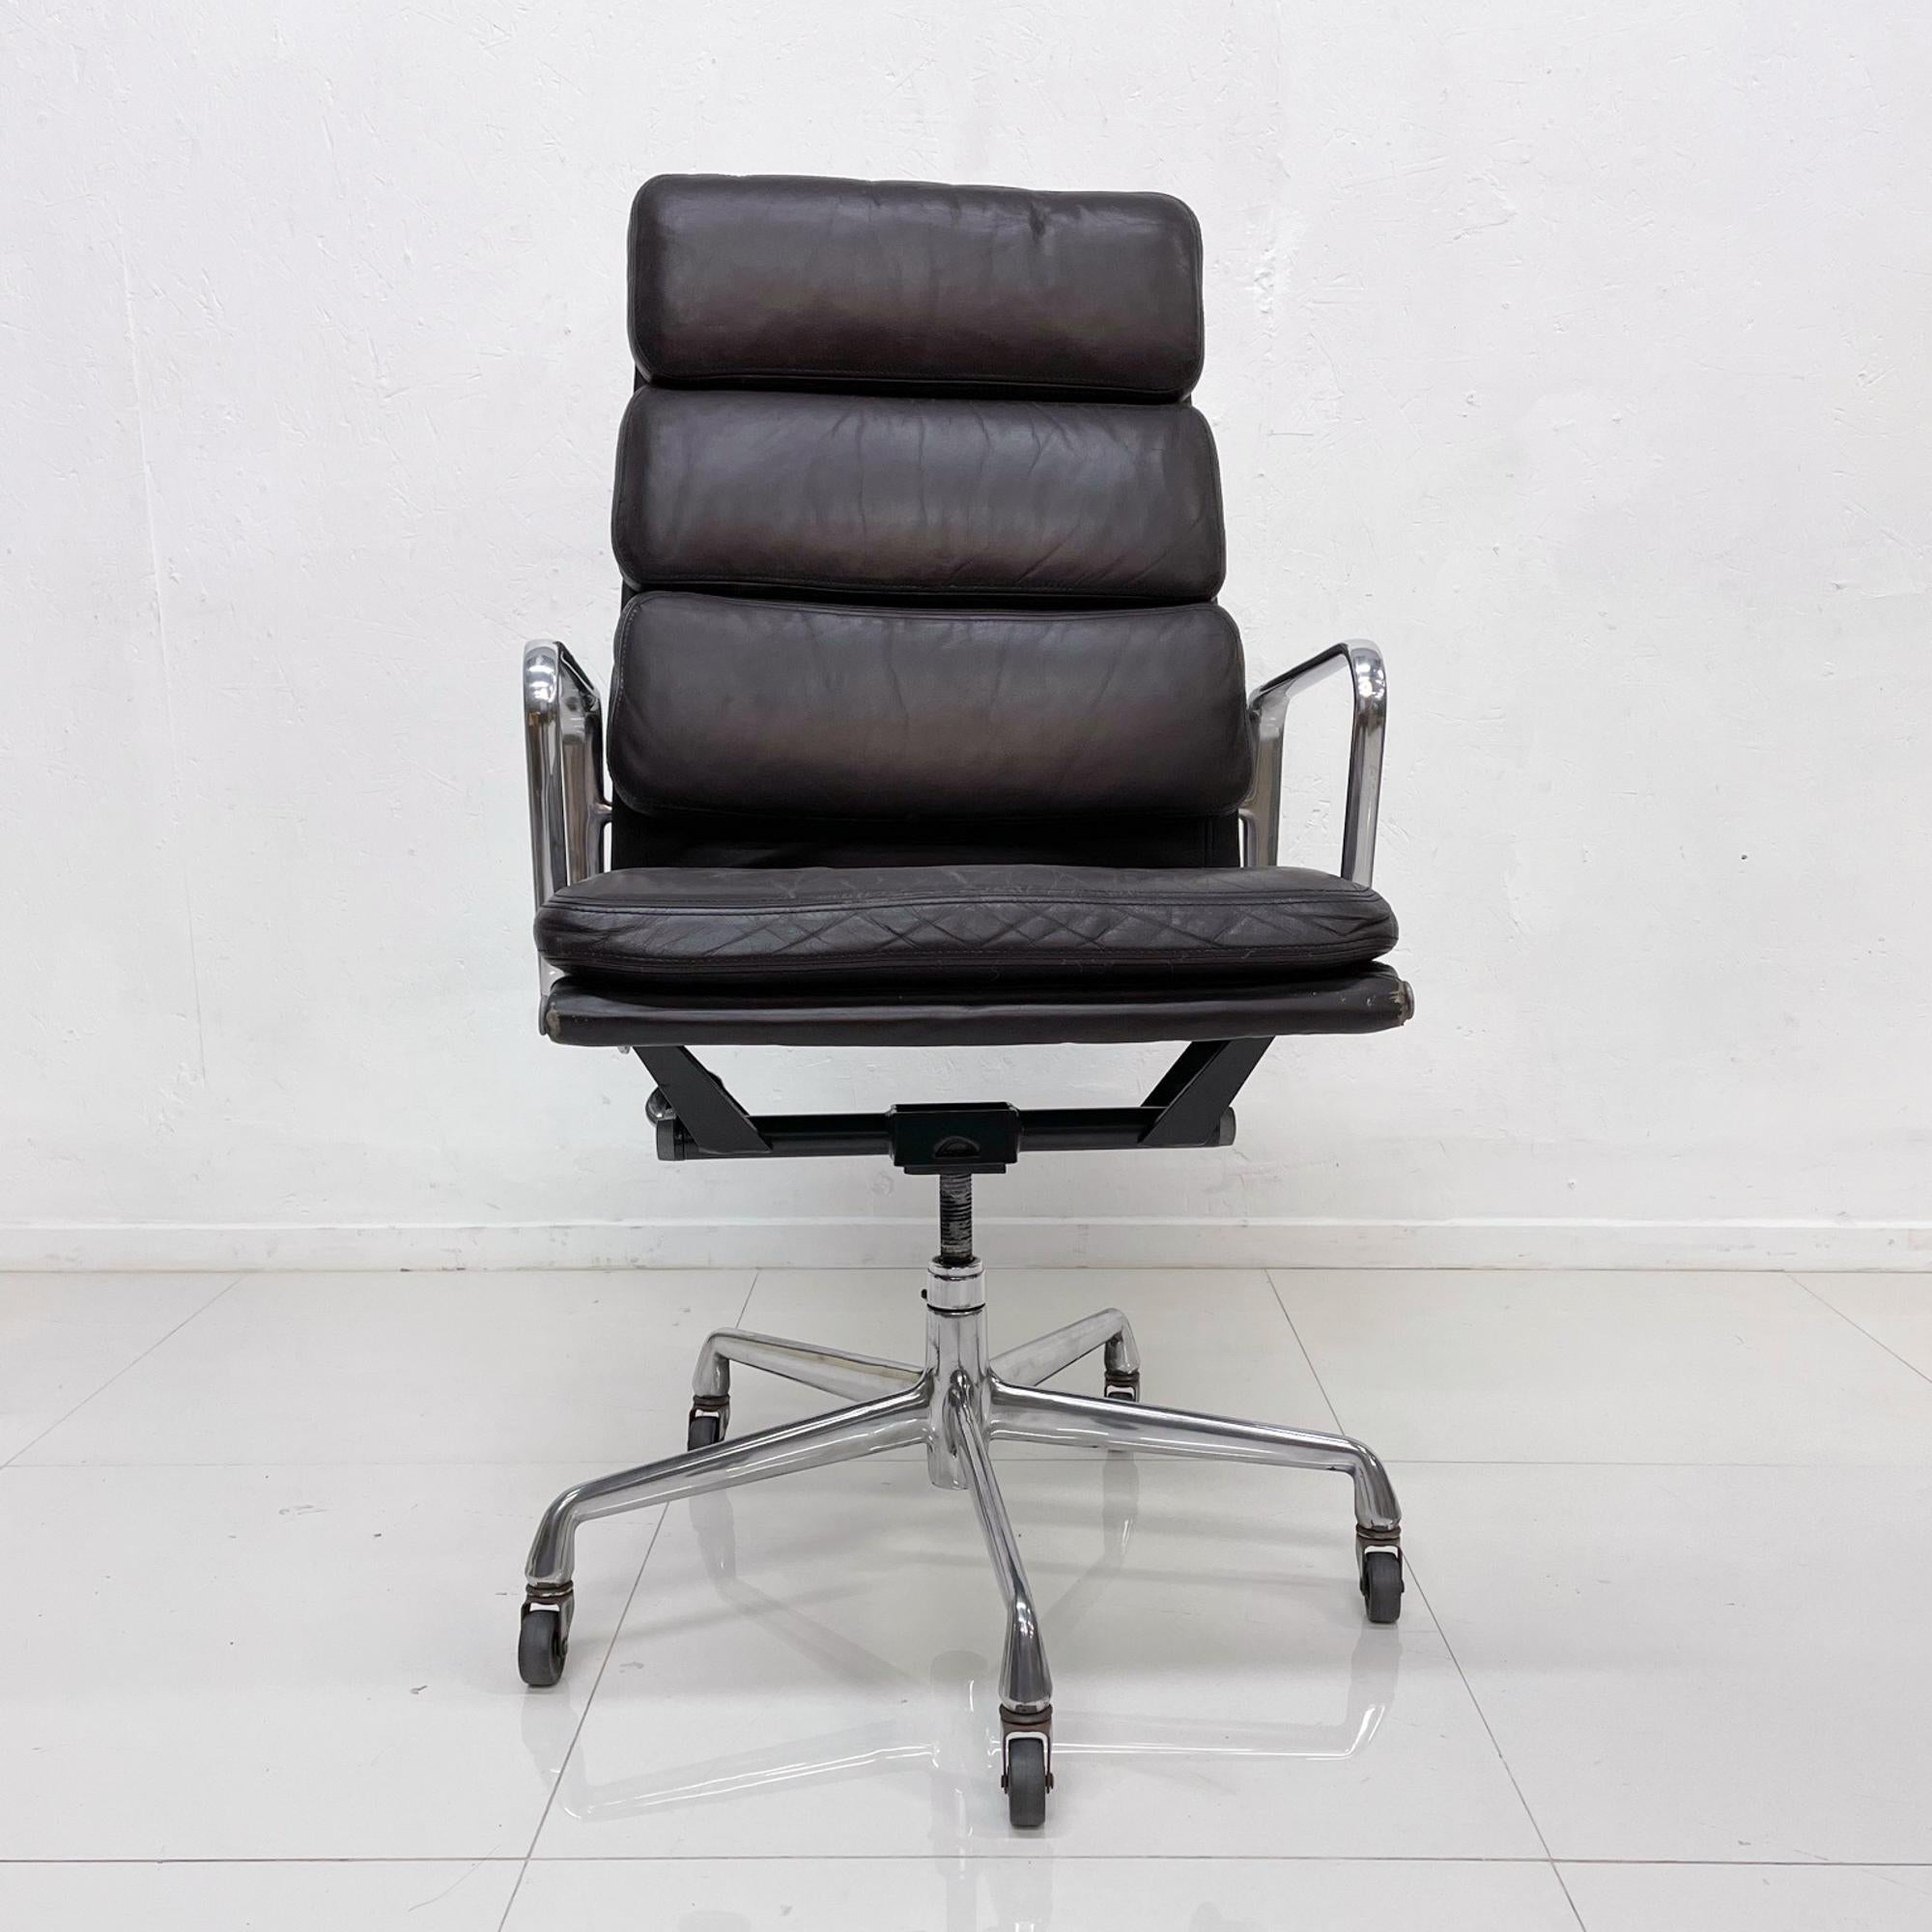 For your consideration, a vintage soft pad office chair, designed by Charles and Ray Eames for the Aluminum Group, for Herman Miller.

The chair doesn't have the Herman Miller or Vitra label present. 

The chair is vintage with brown leather.